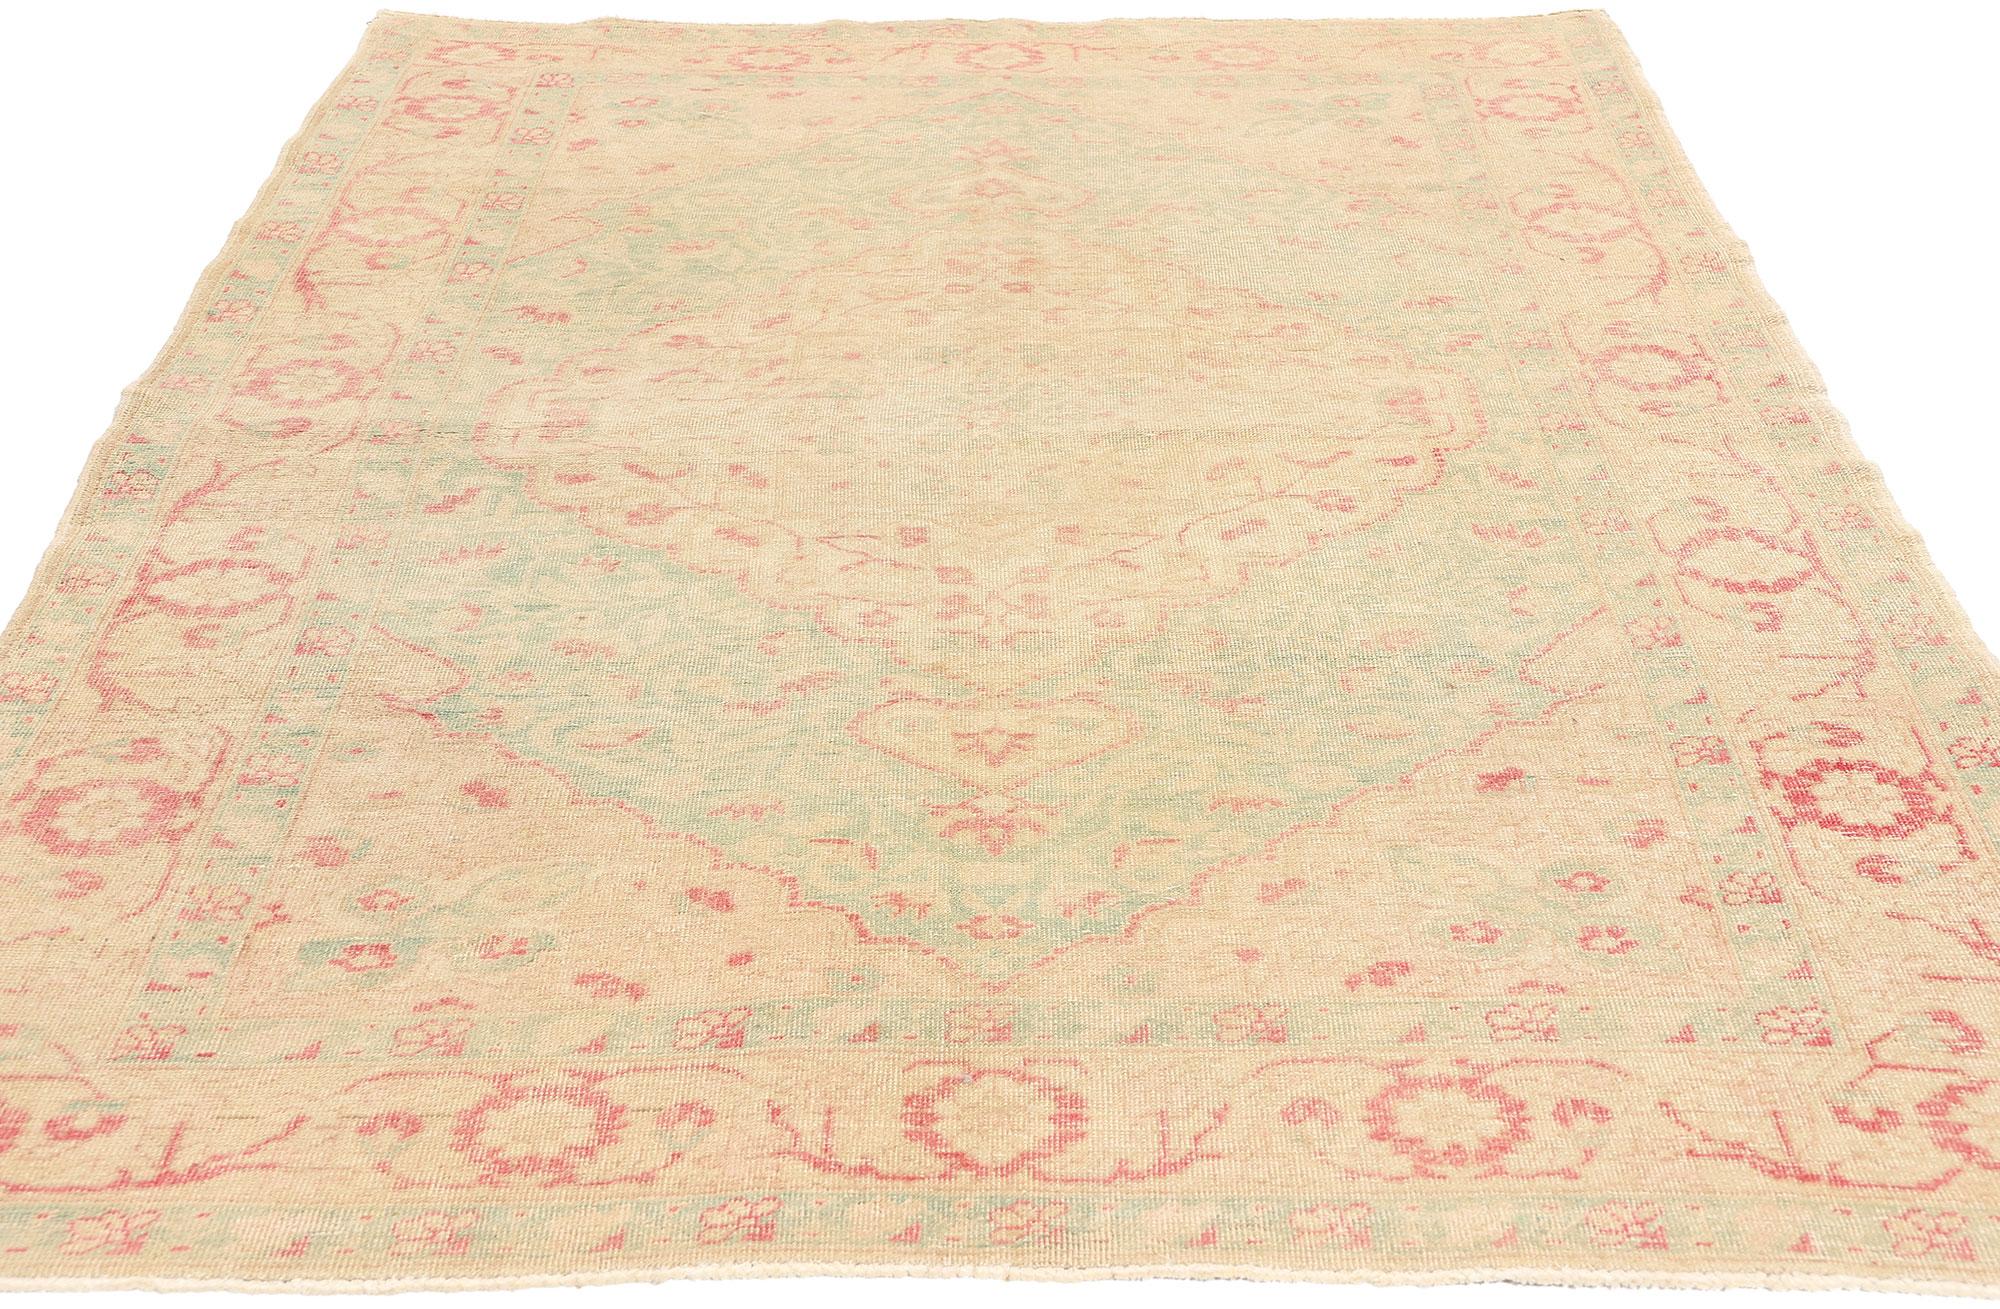 Oushak Vintage Turkish Sivas Rug with Soft Earth-Tone Colors For Sale